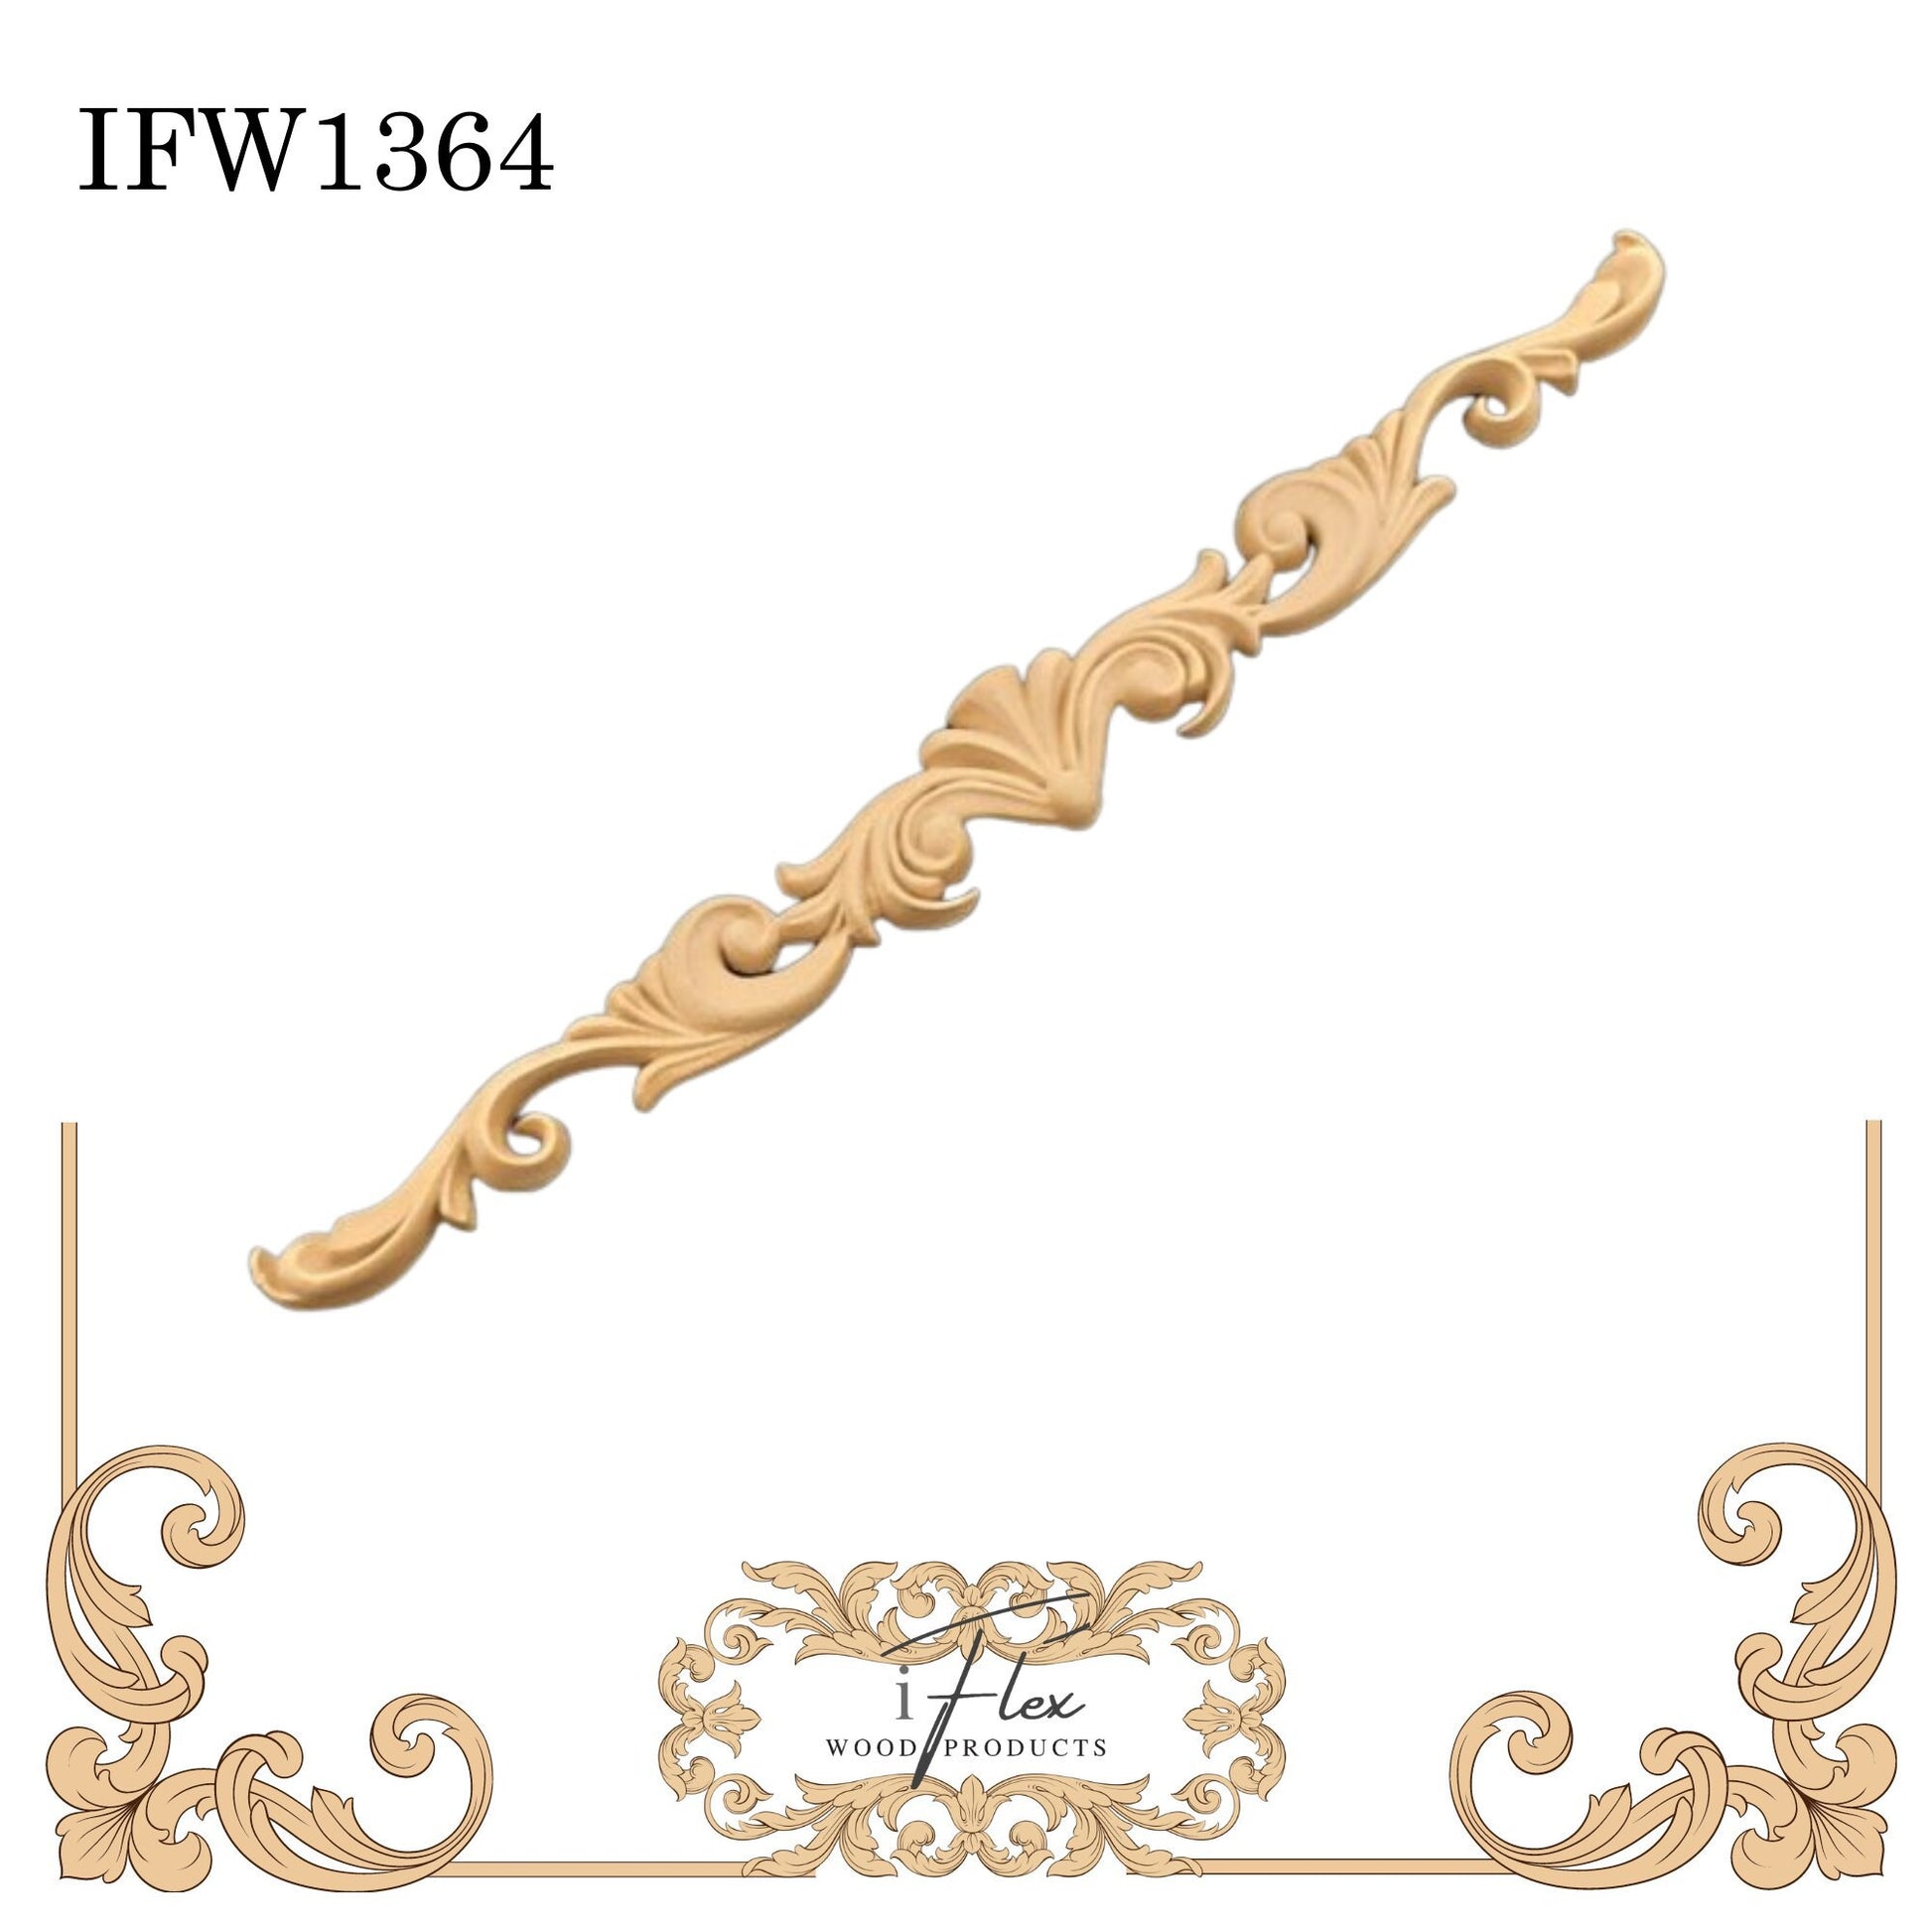 IFW 1364 iFlex Wood Products, bendable mouldings, flexible, wooden appliques, pediment